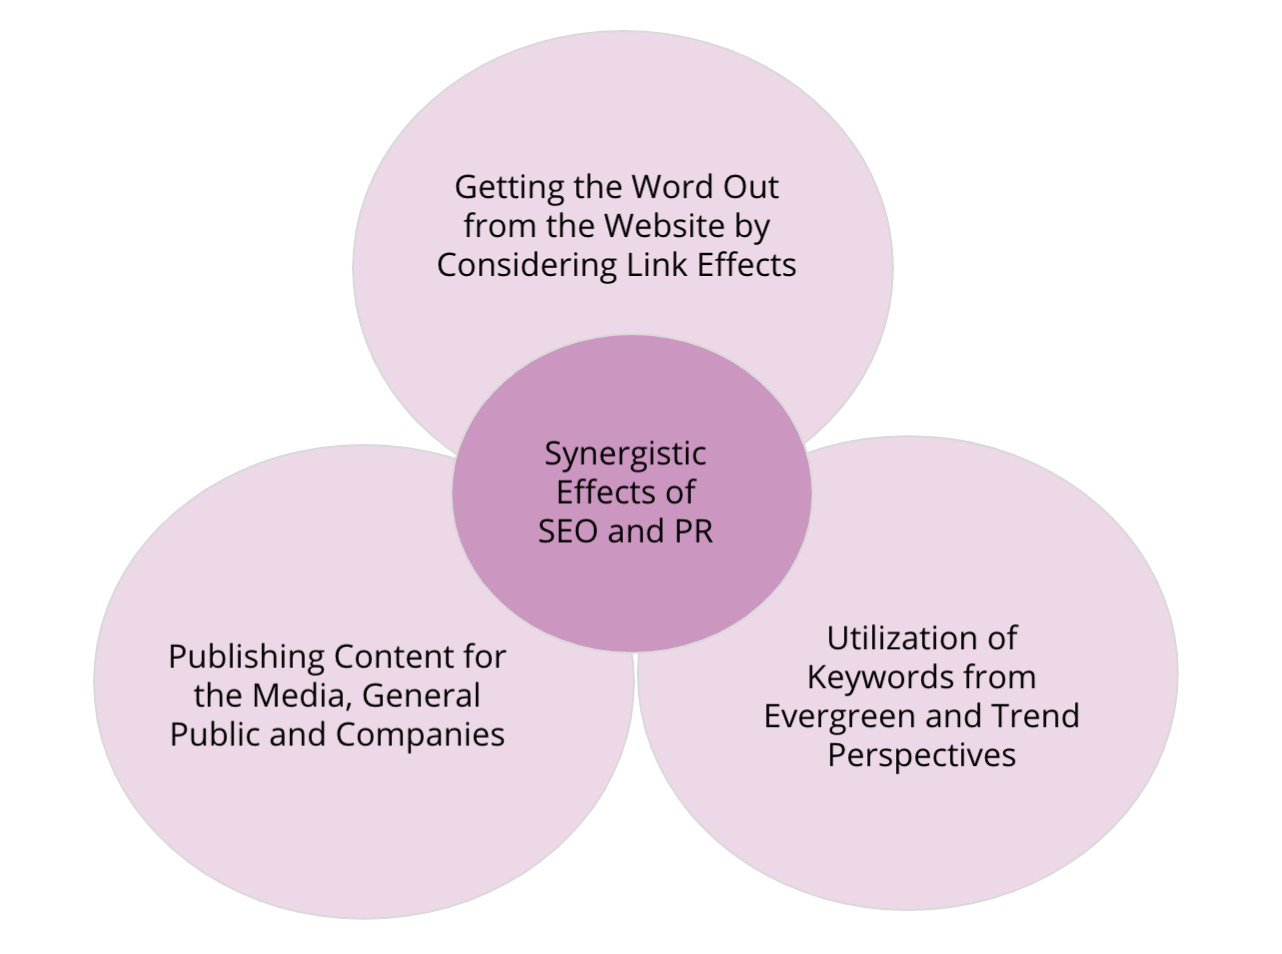 Three utilization points of seo and pr